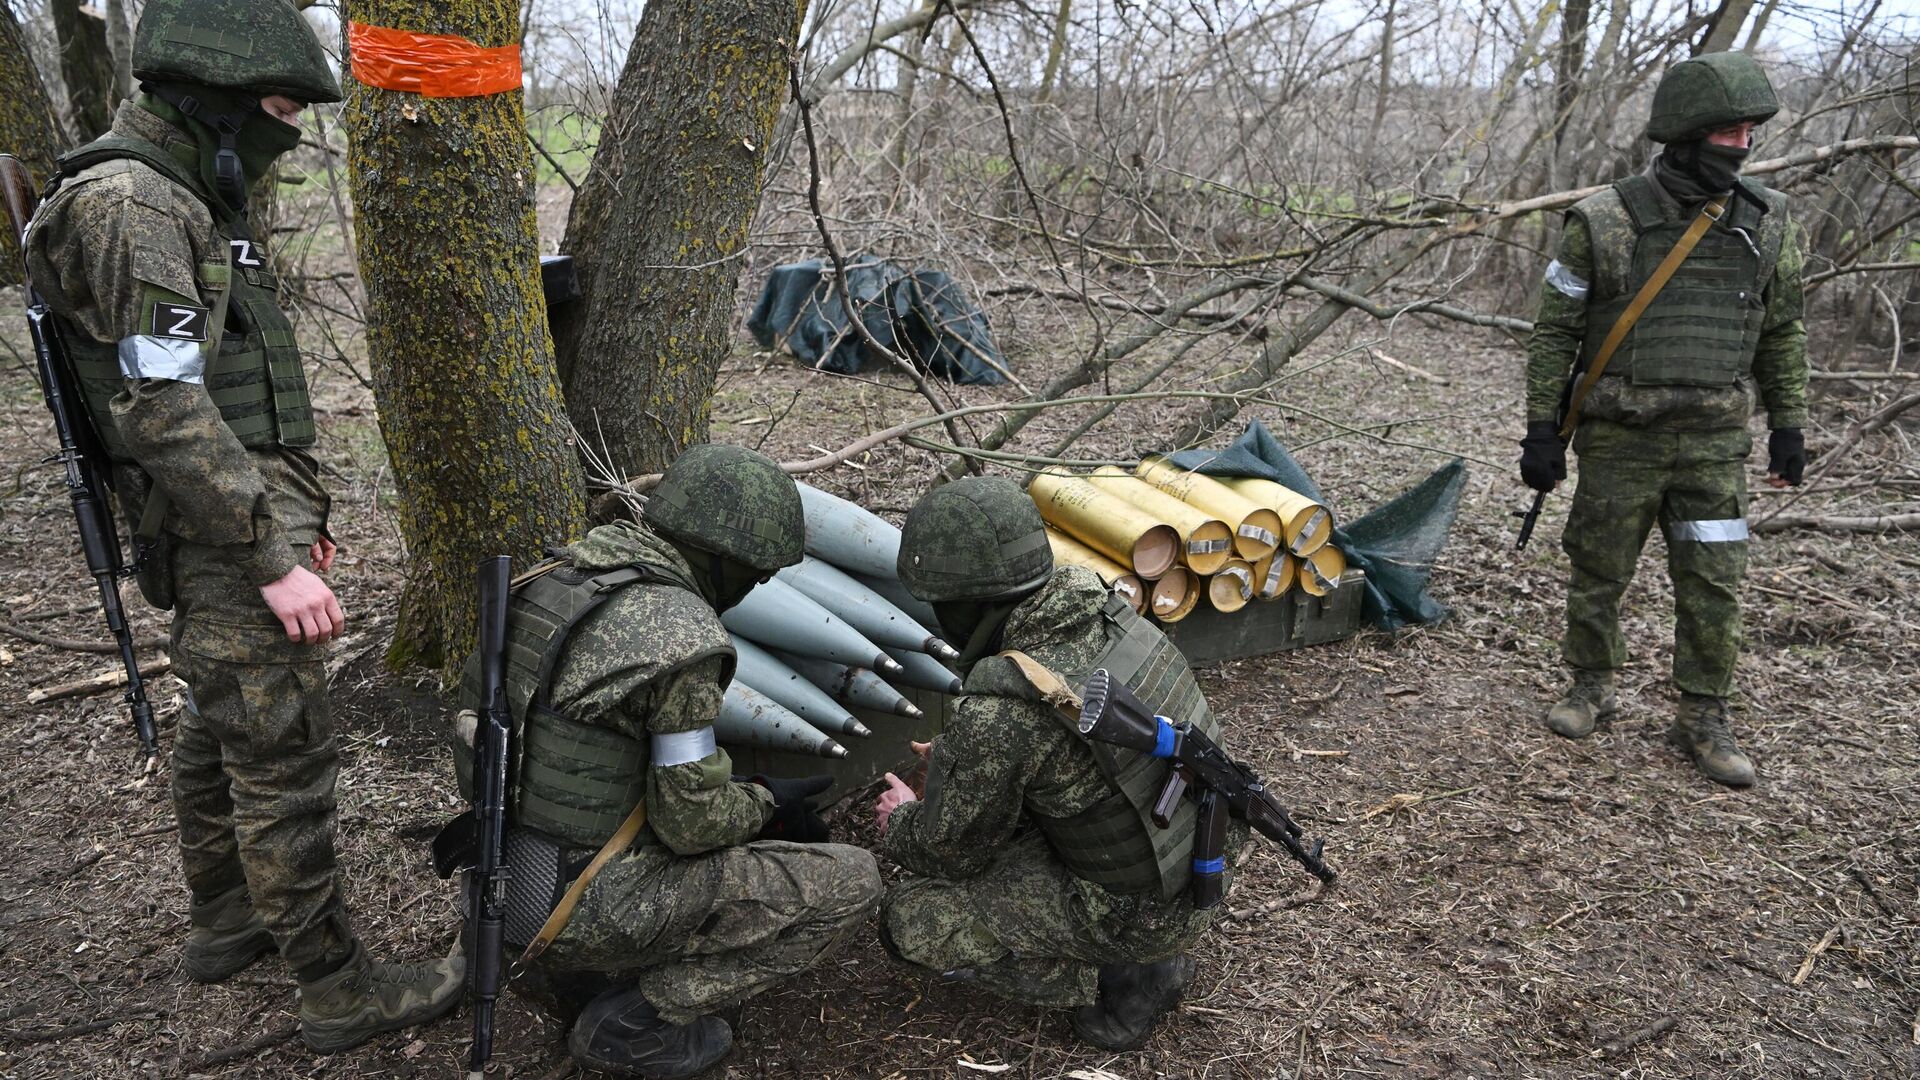 Russian Army Claims Destruction of Ukrainian Gatherings in Ongoing Conflict